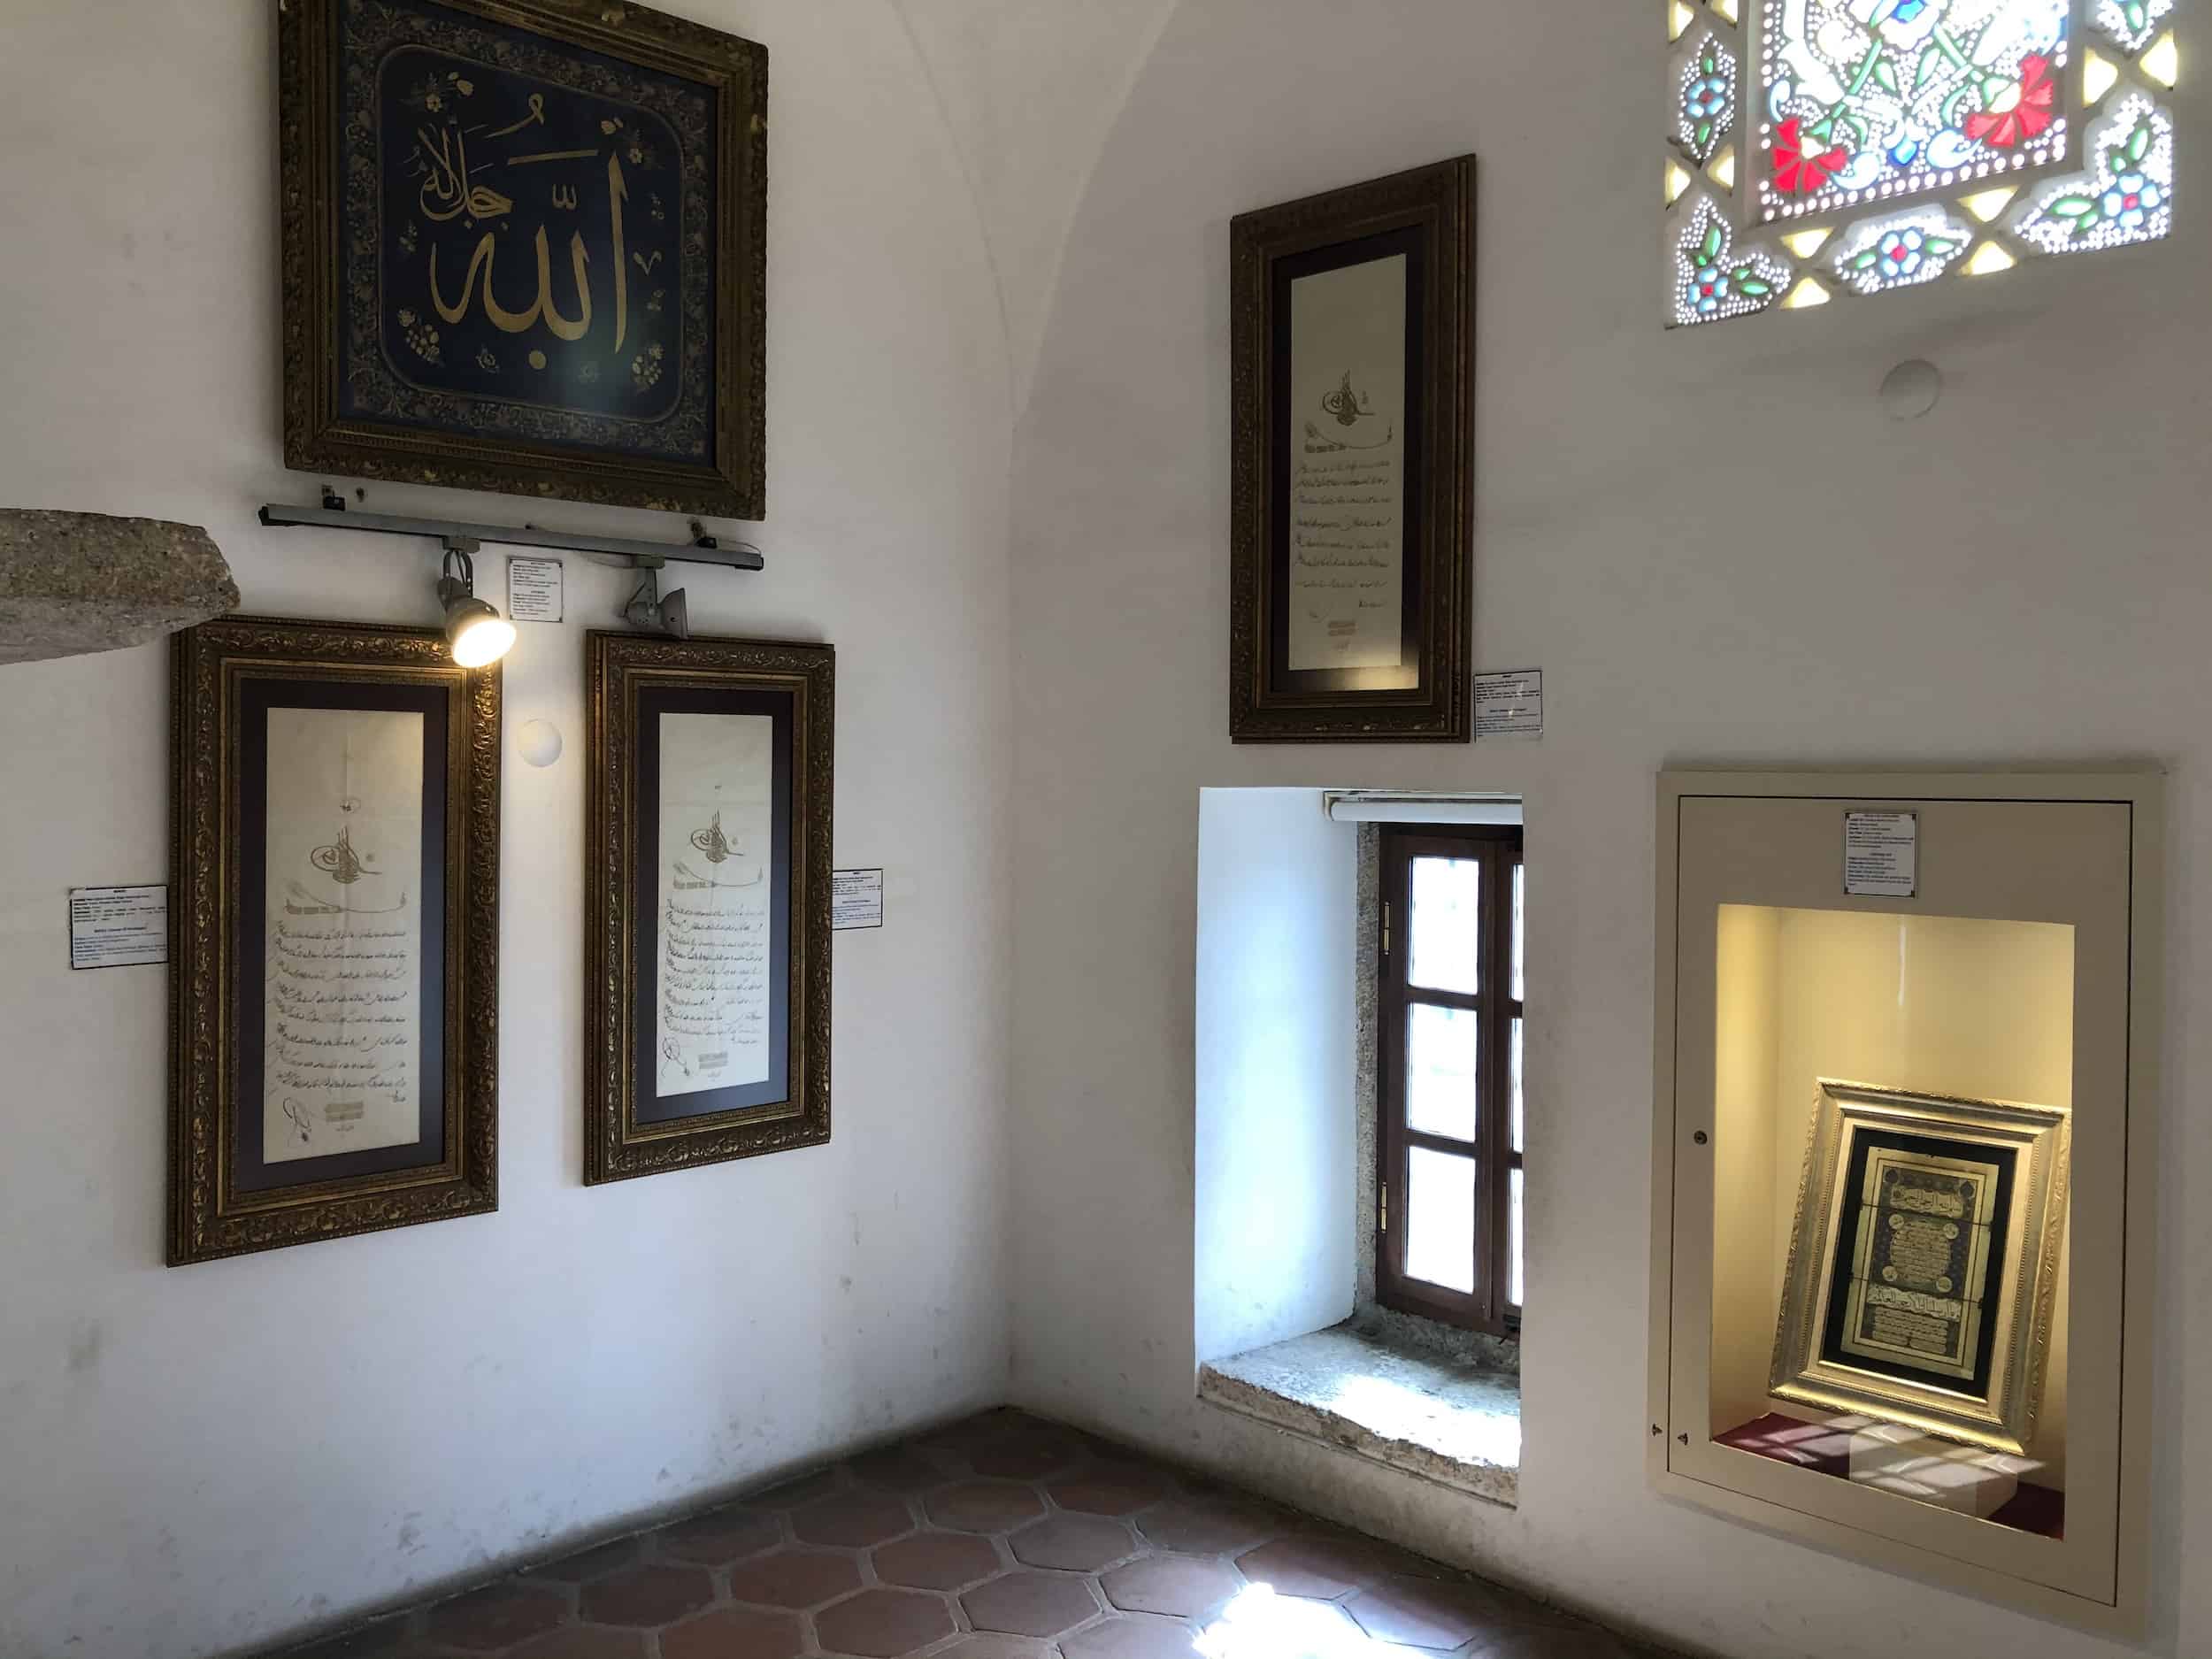 Calligraphy Room at the Selimiye Foundation Museum in Edirne, Turkey